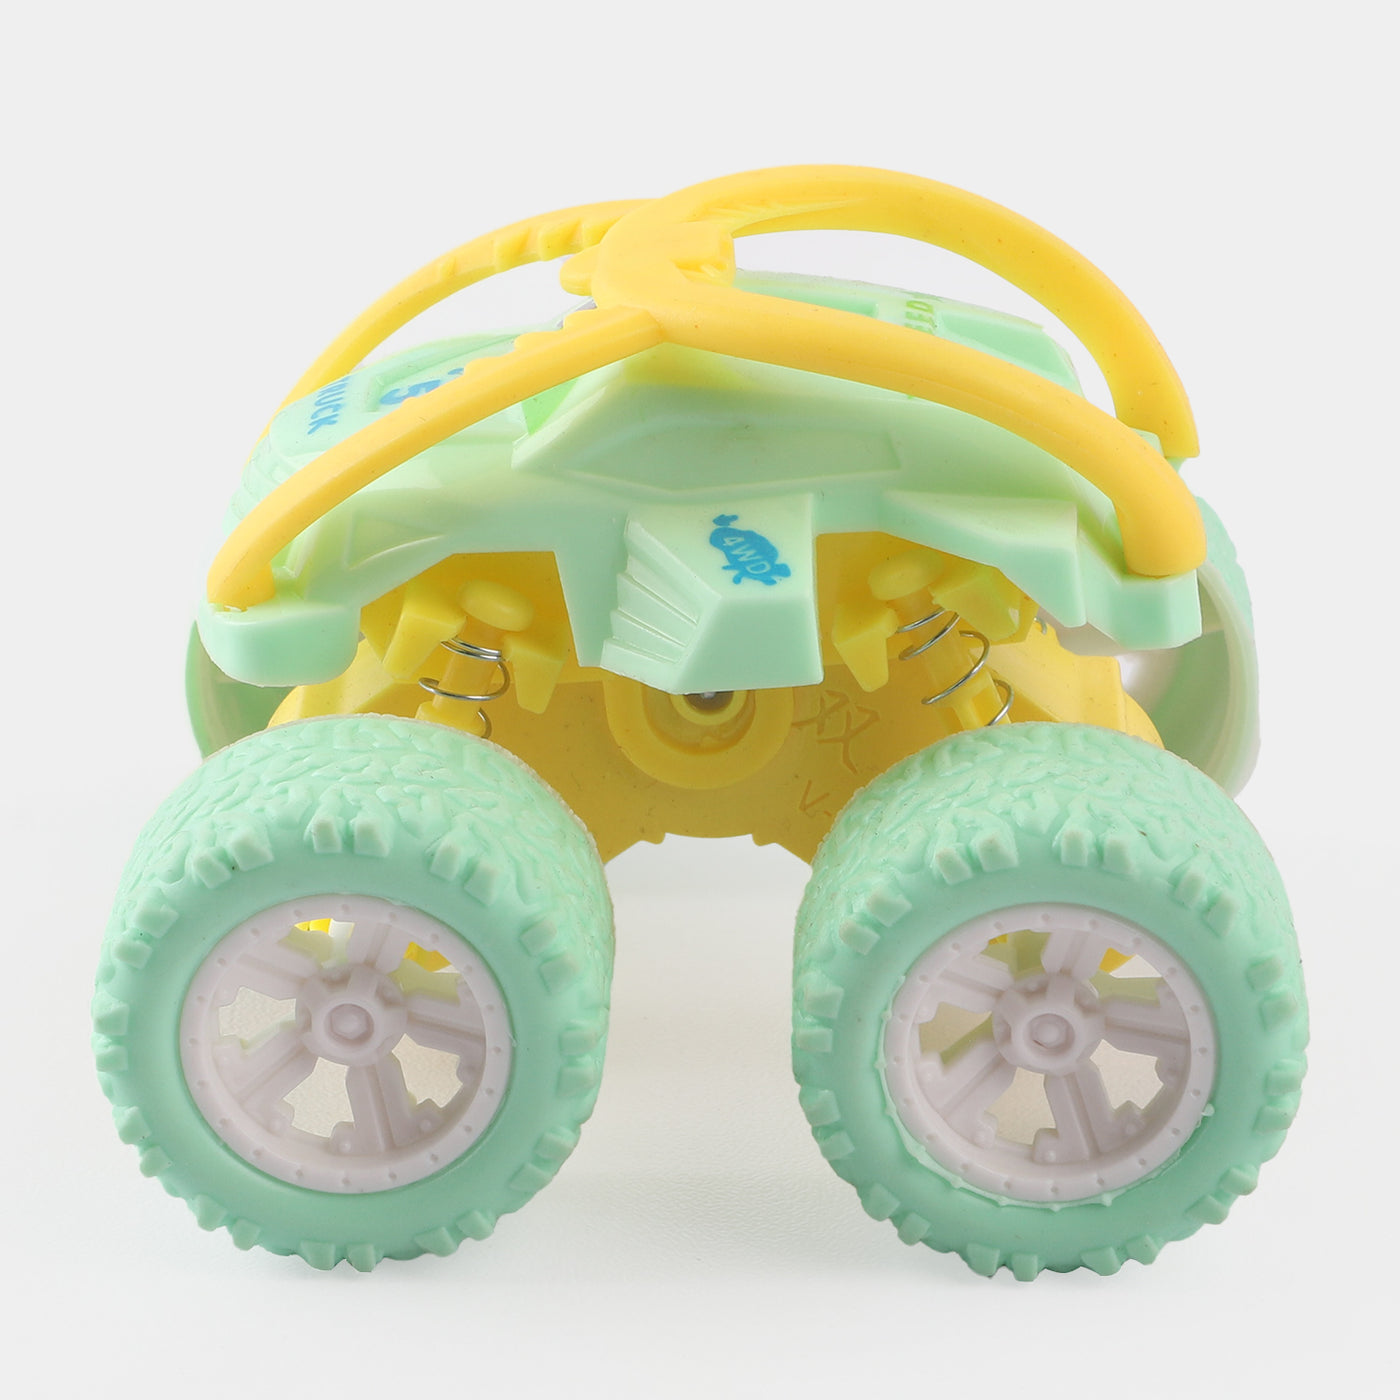 Friction Mini Model Vehicle Toy For Kids